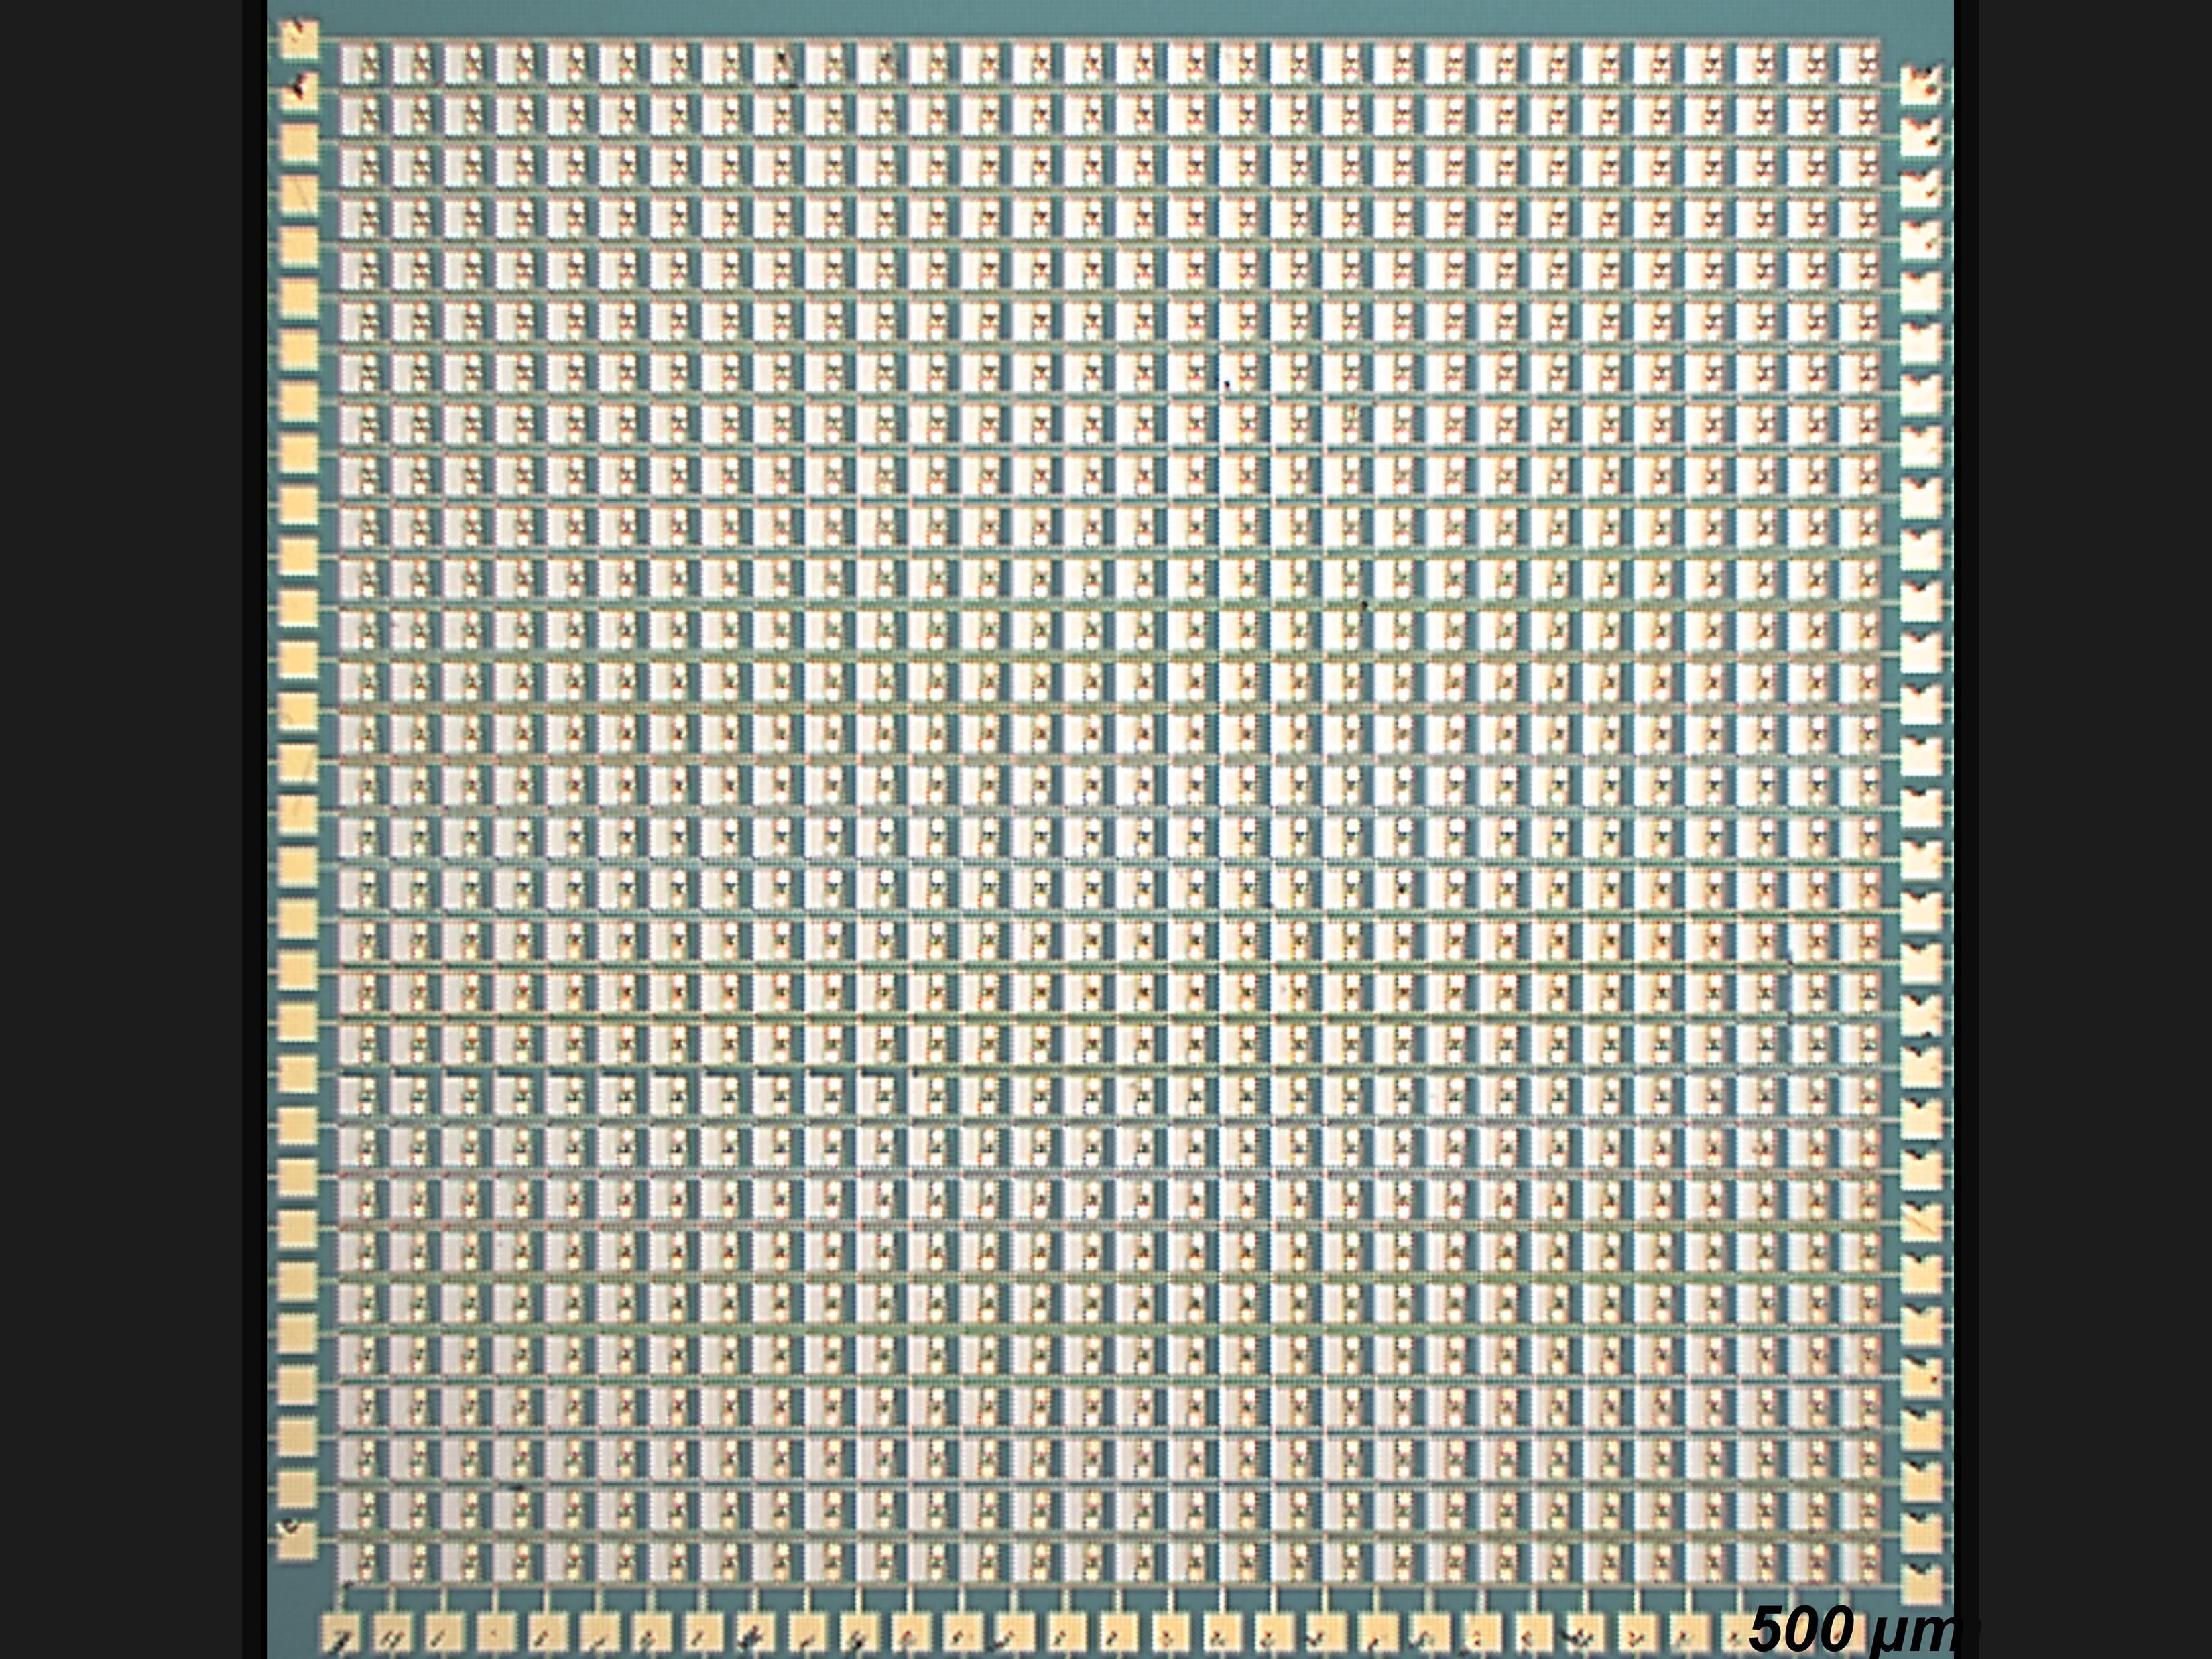 close up image of a chip